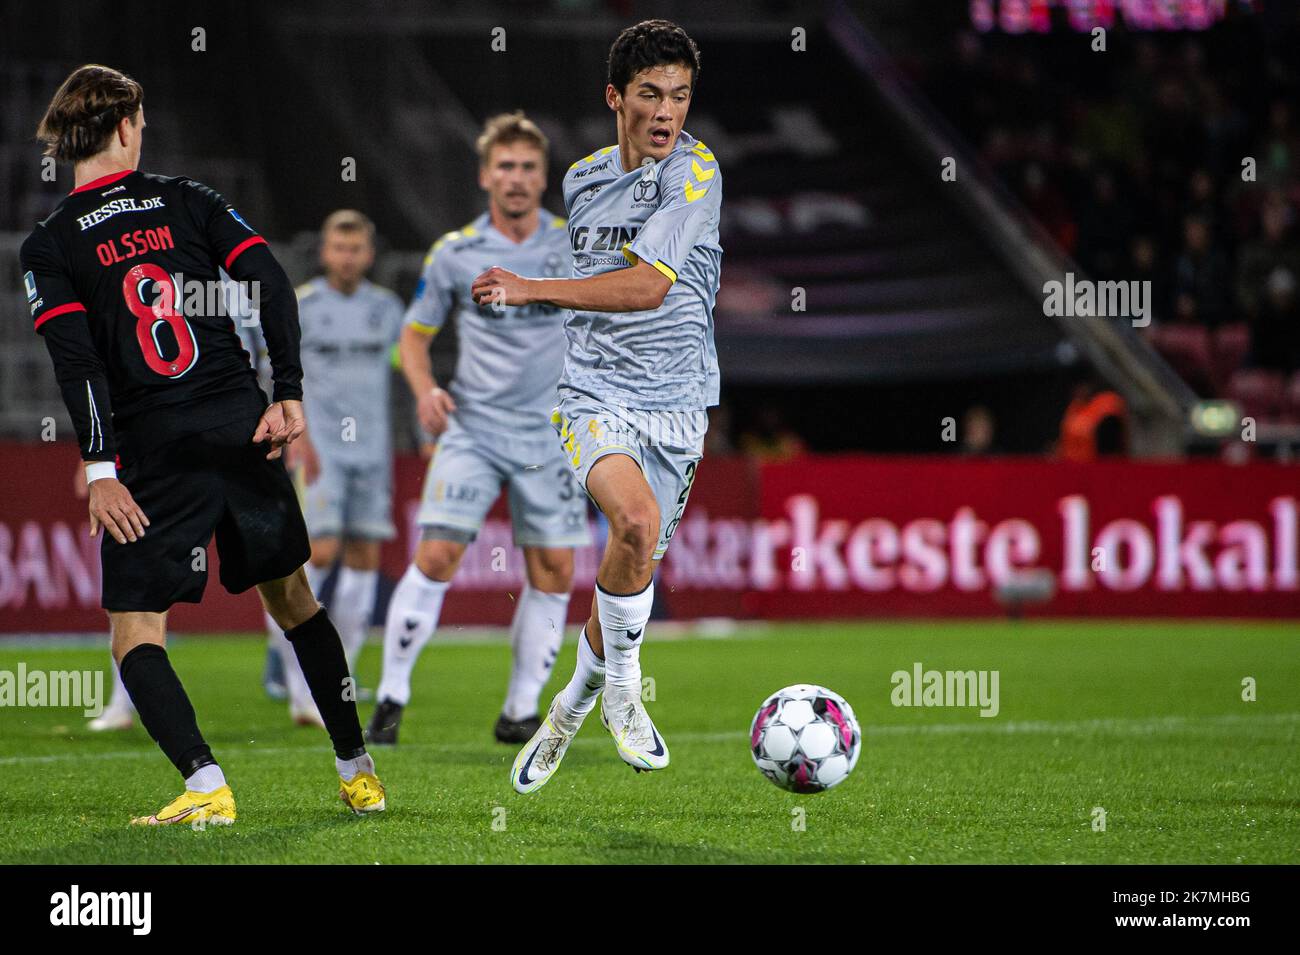 Herning, Denmark. 16th, October Elijah Just of AC Horsens seen during the 3F Superliga match between Midtjylland and Horsens at MCH Arena in Herning. (Photo credit: Gonzales Photo -